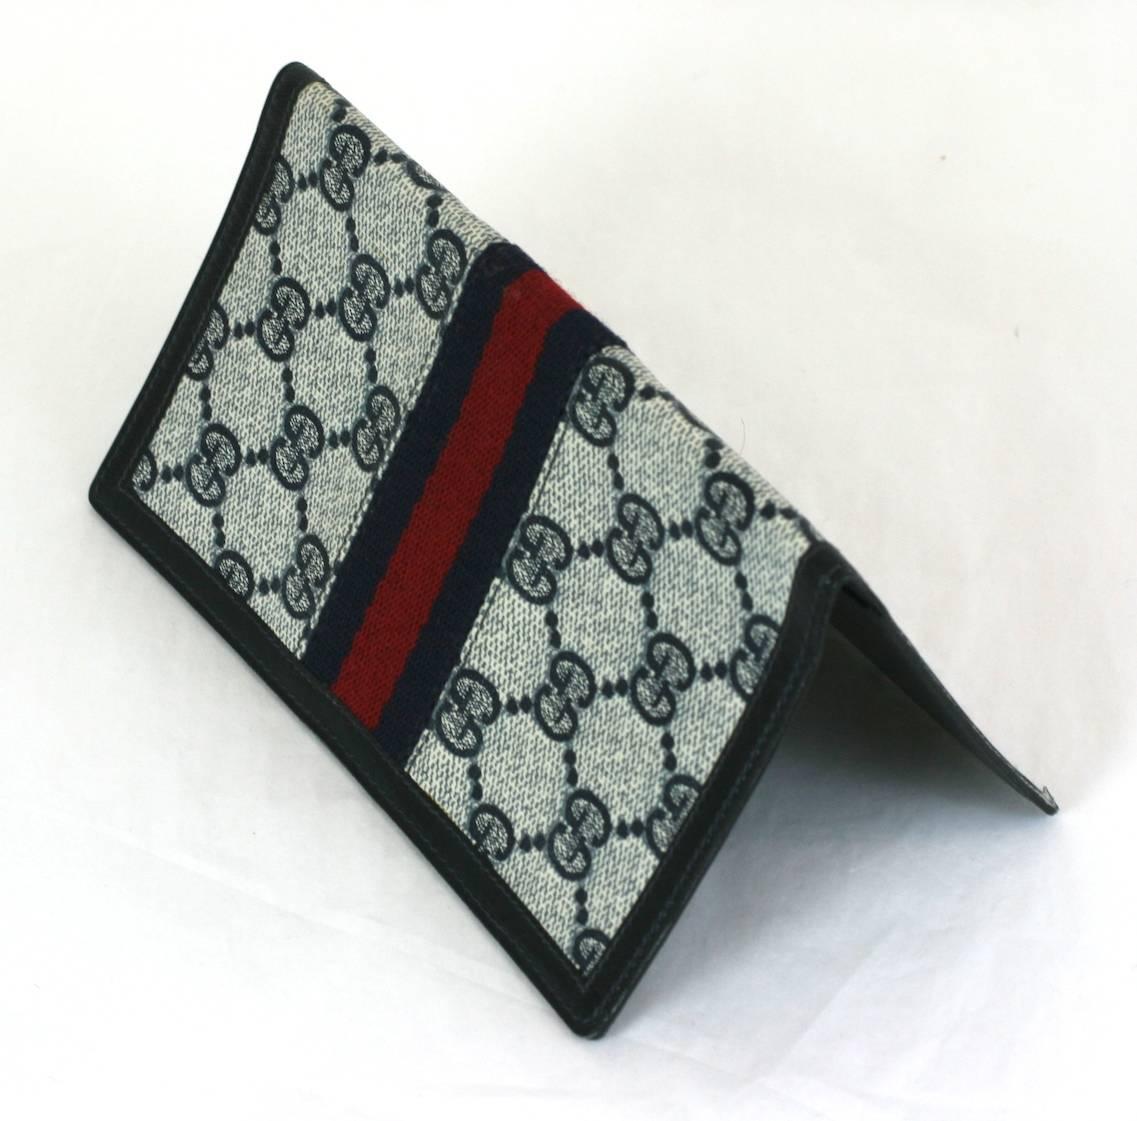 Gucci Logo Billfold from Italy. Signature GG print textile with navy and red racing stripe twill ribbon. Lined in black calf leather. Italy 1970's. 6.25